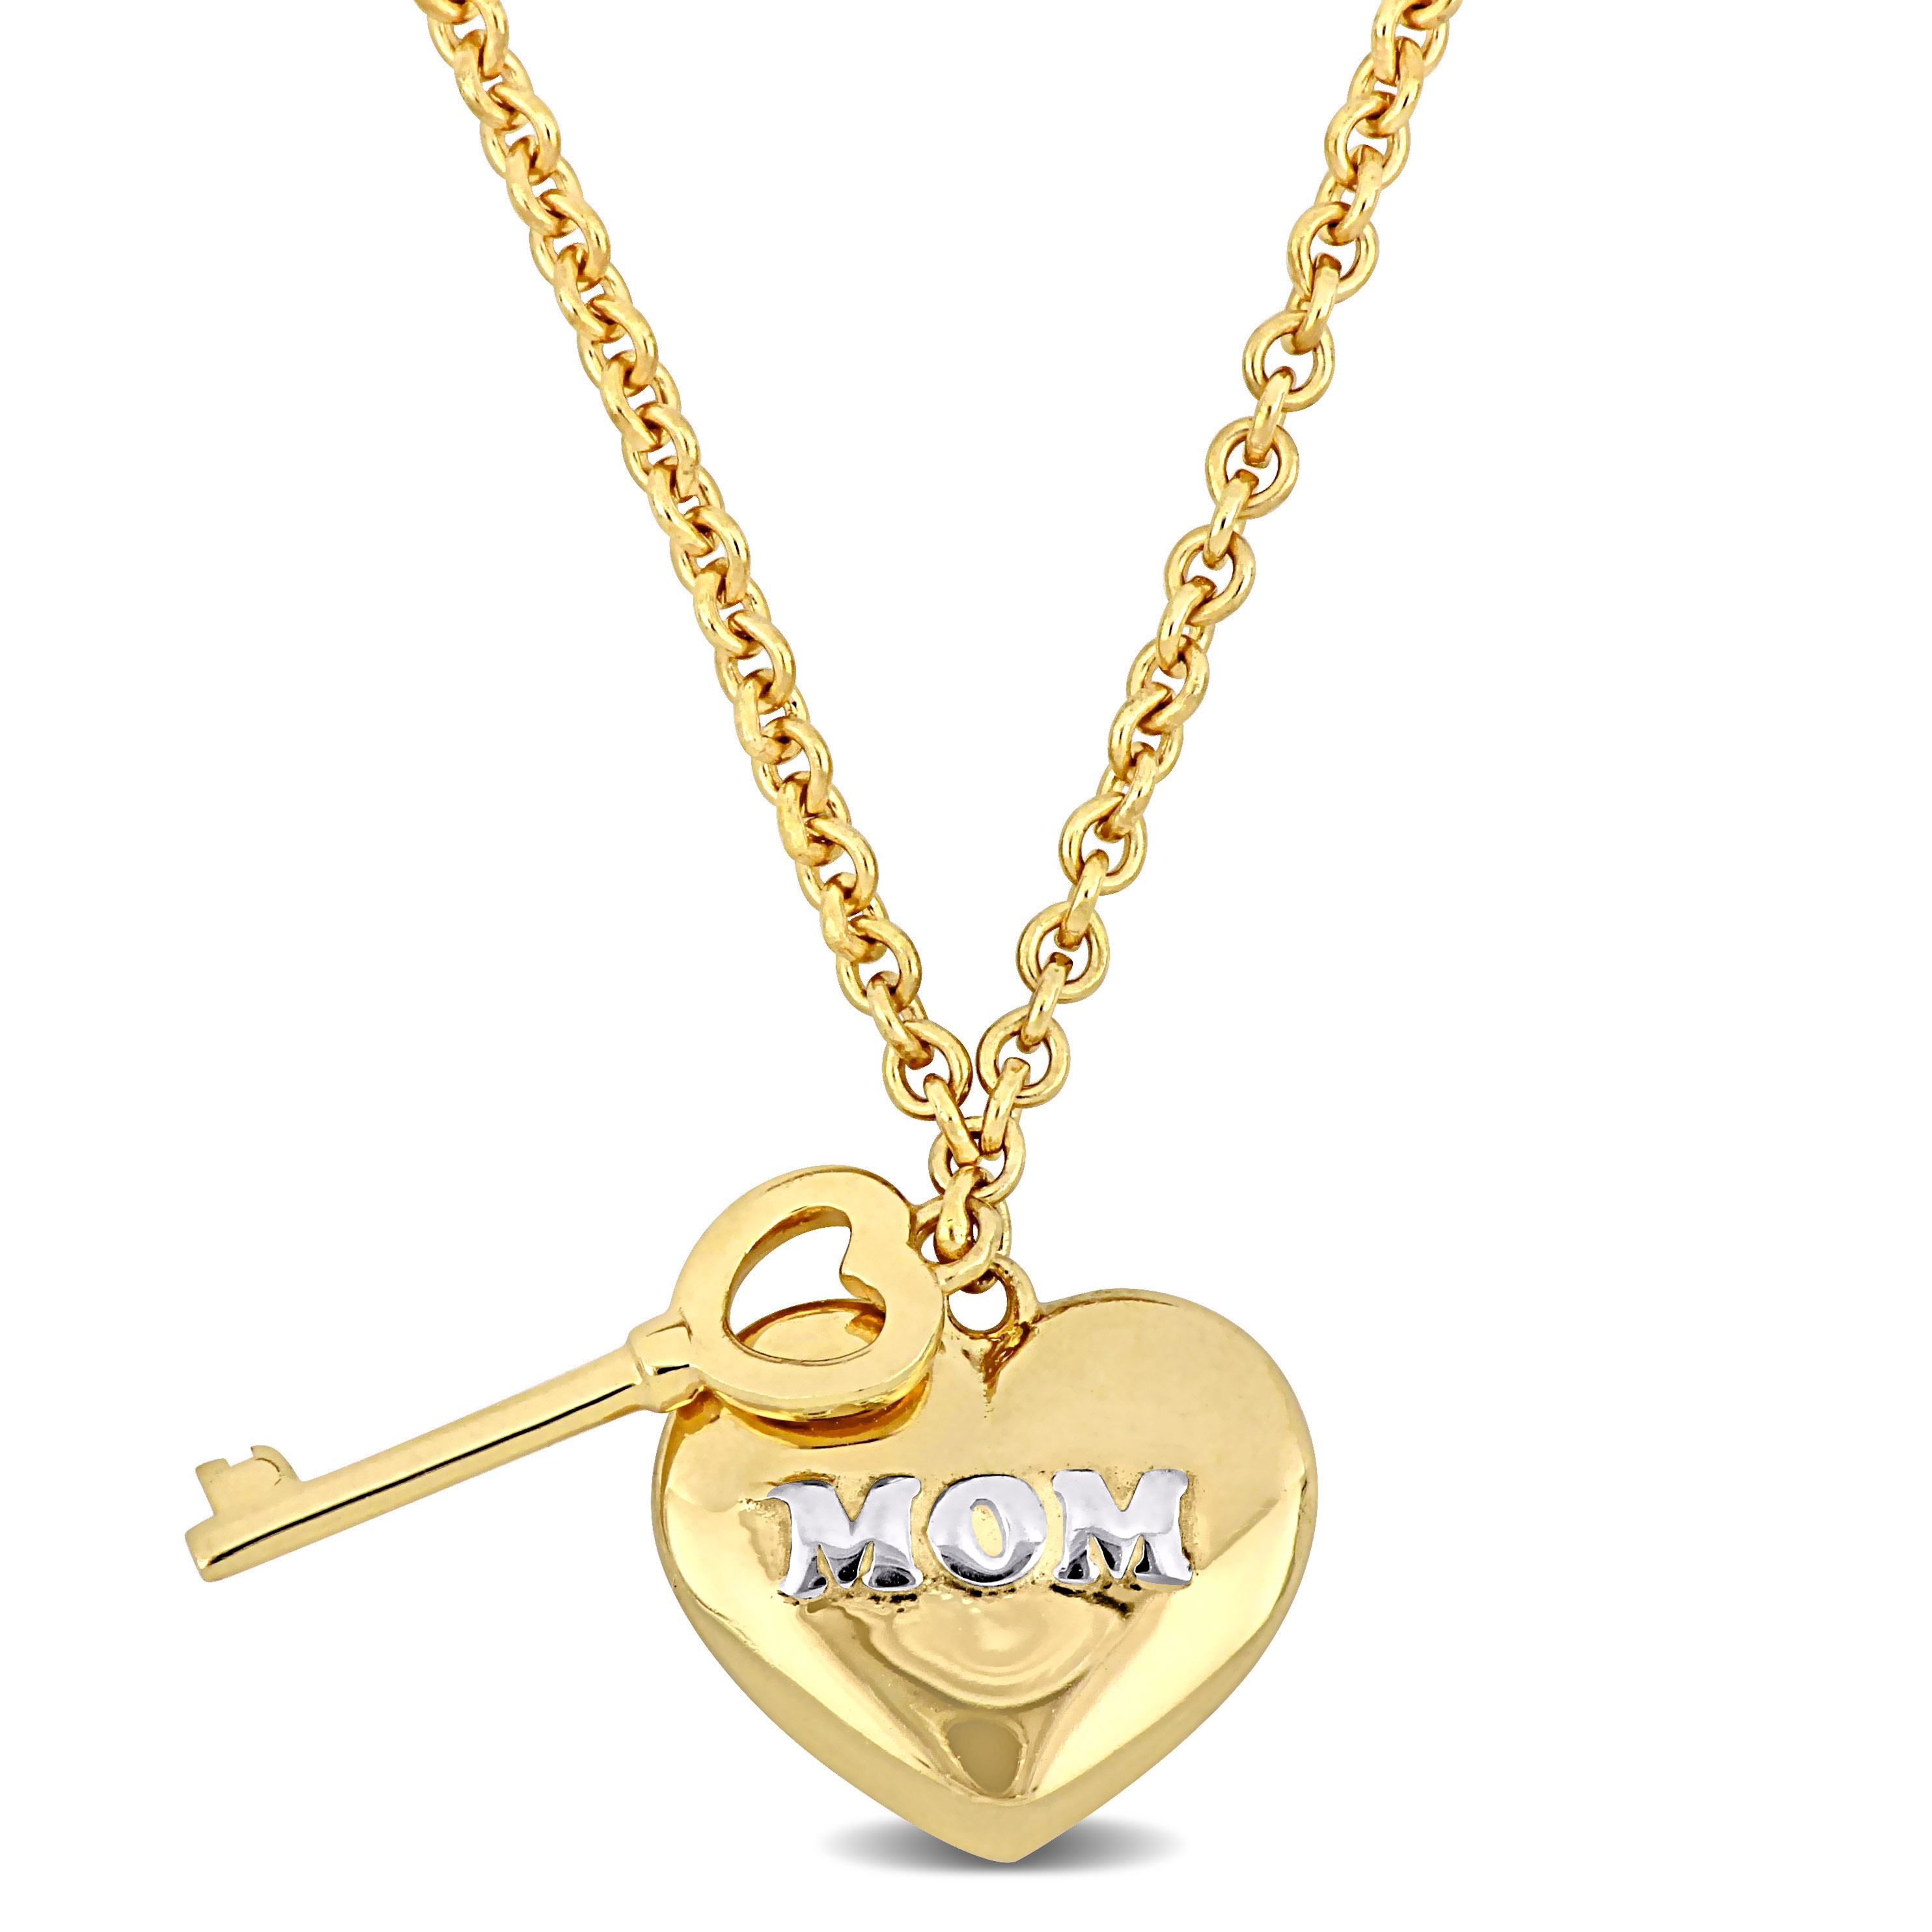 Heart and Key Charm Love Mom Necklace in Yellow Silver w/ 18k White Gold Plating - 16+2 in.